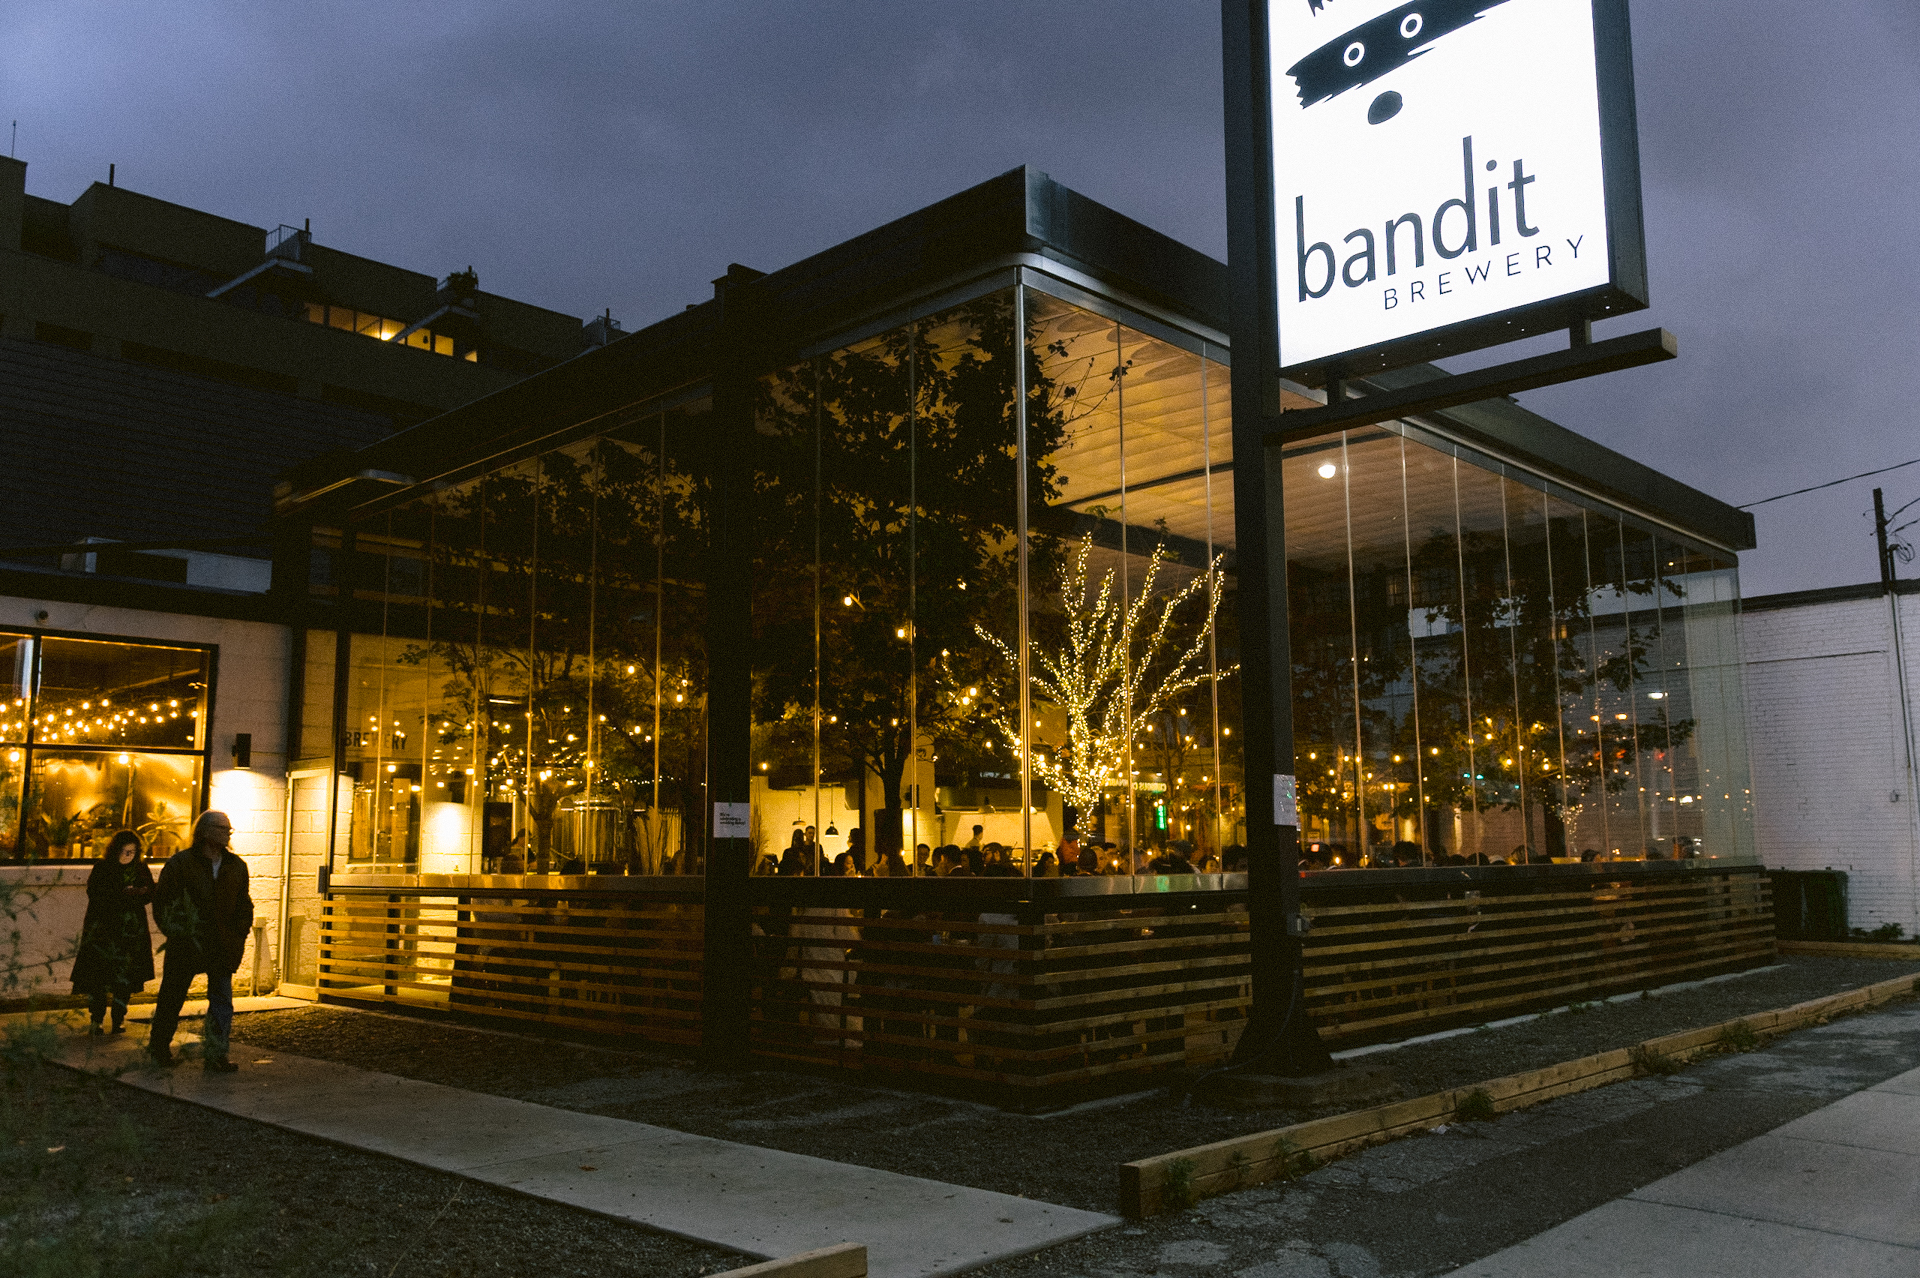 Twilight view of bandit brewery with outdoor lighting and patrons inside.